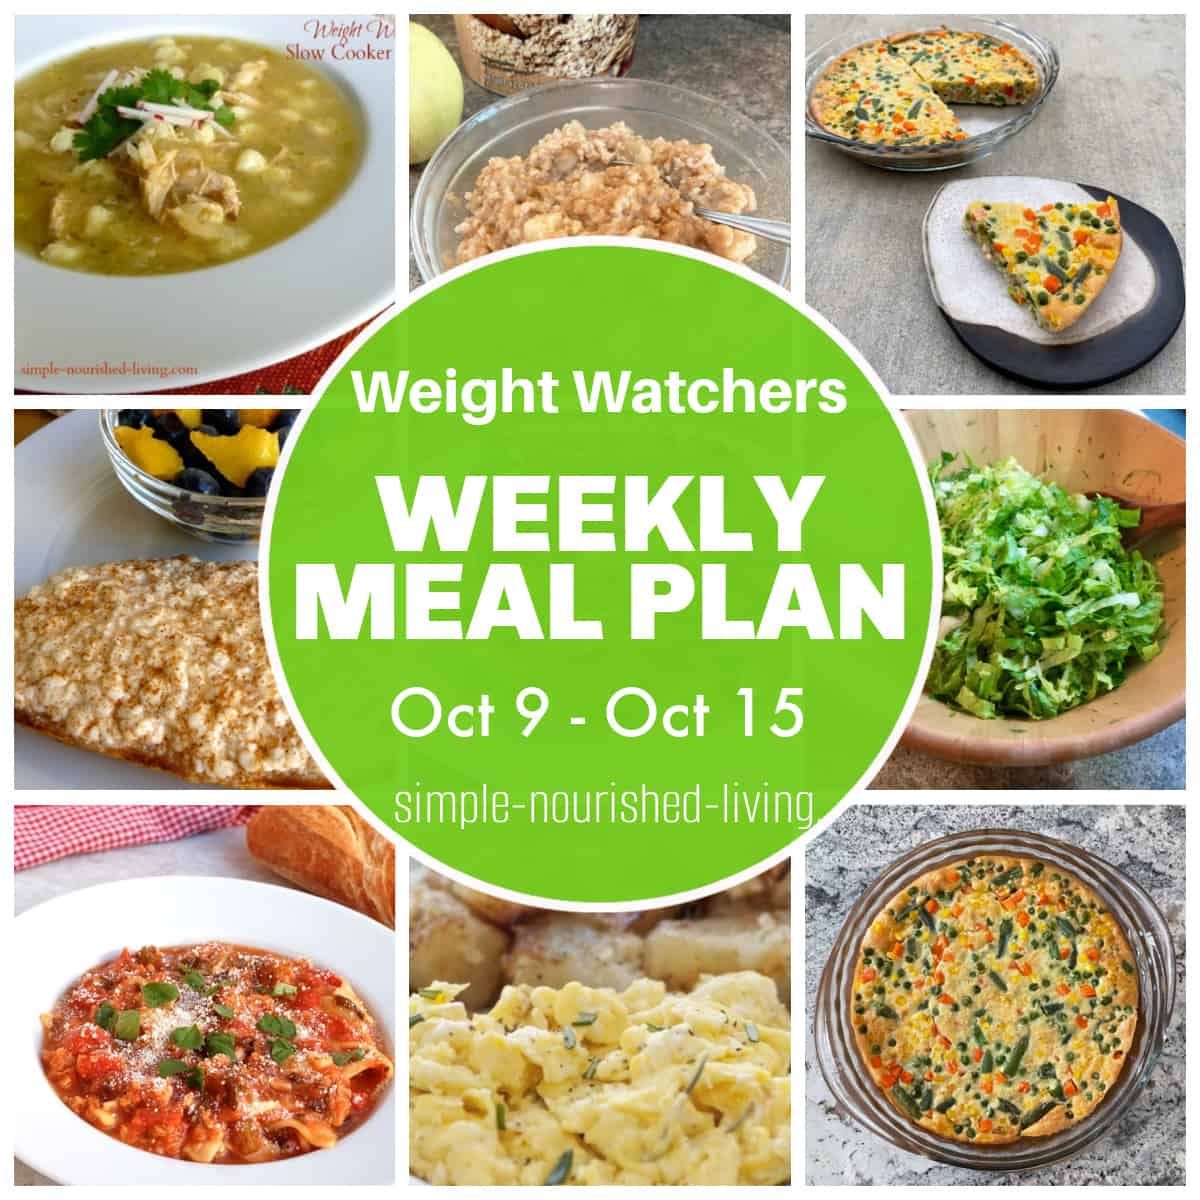 WW Weekly Meal Plan Oct 9